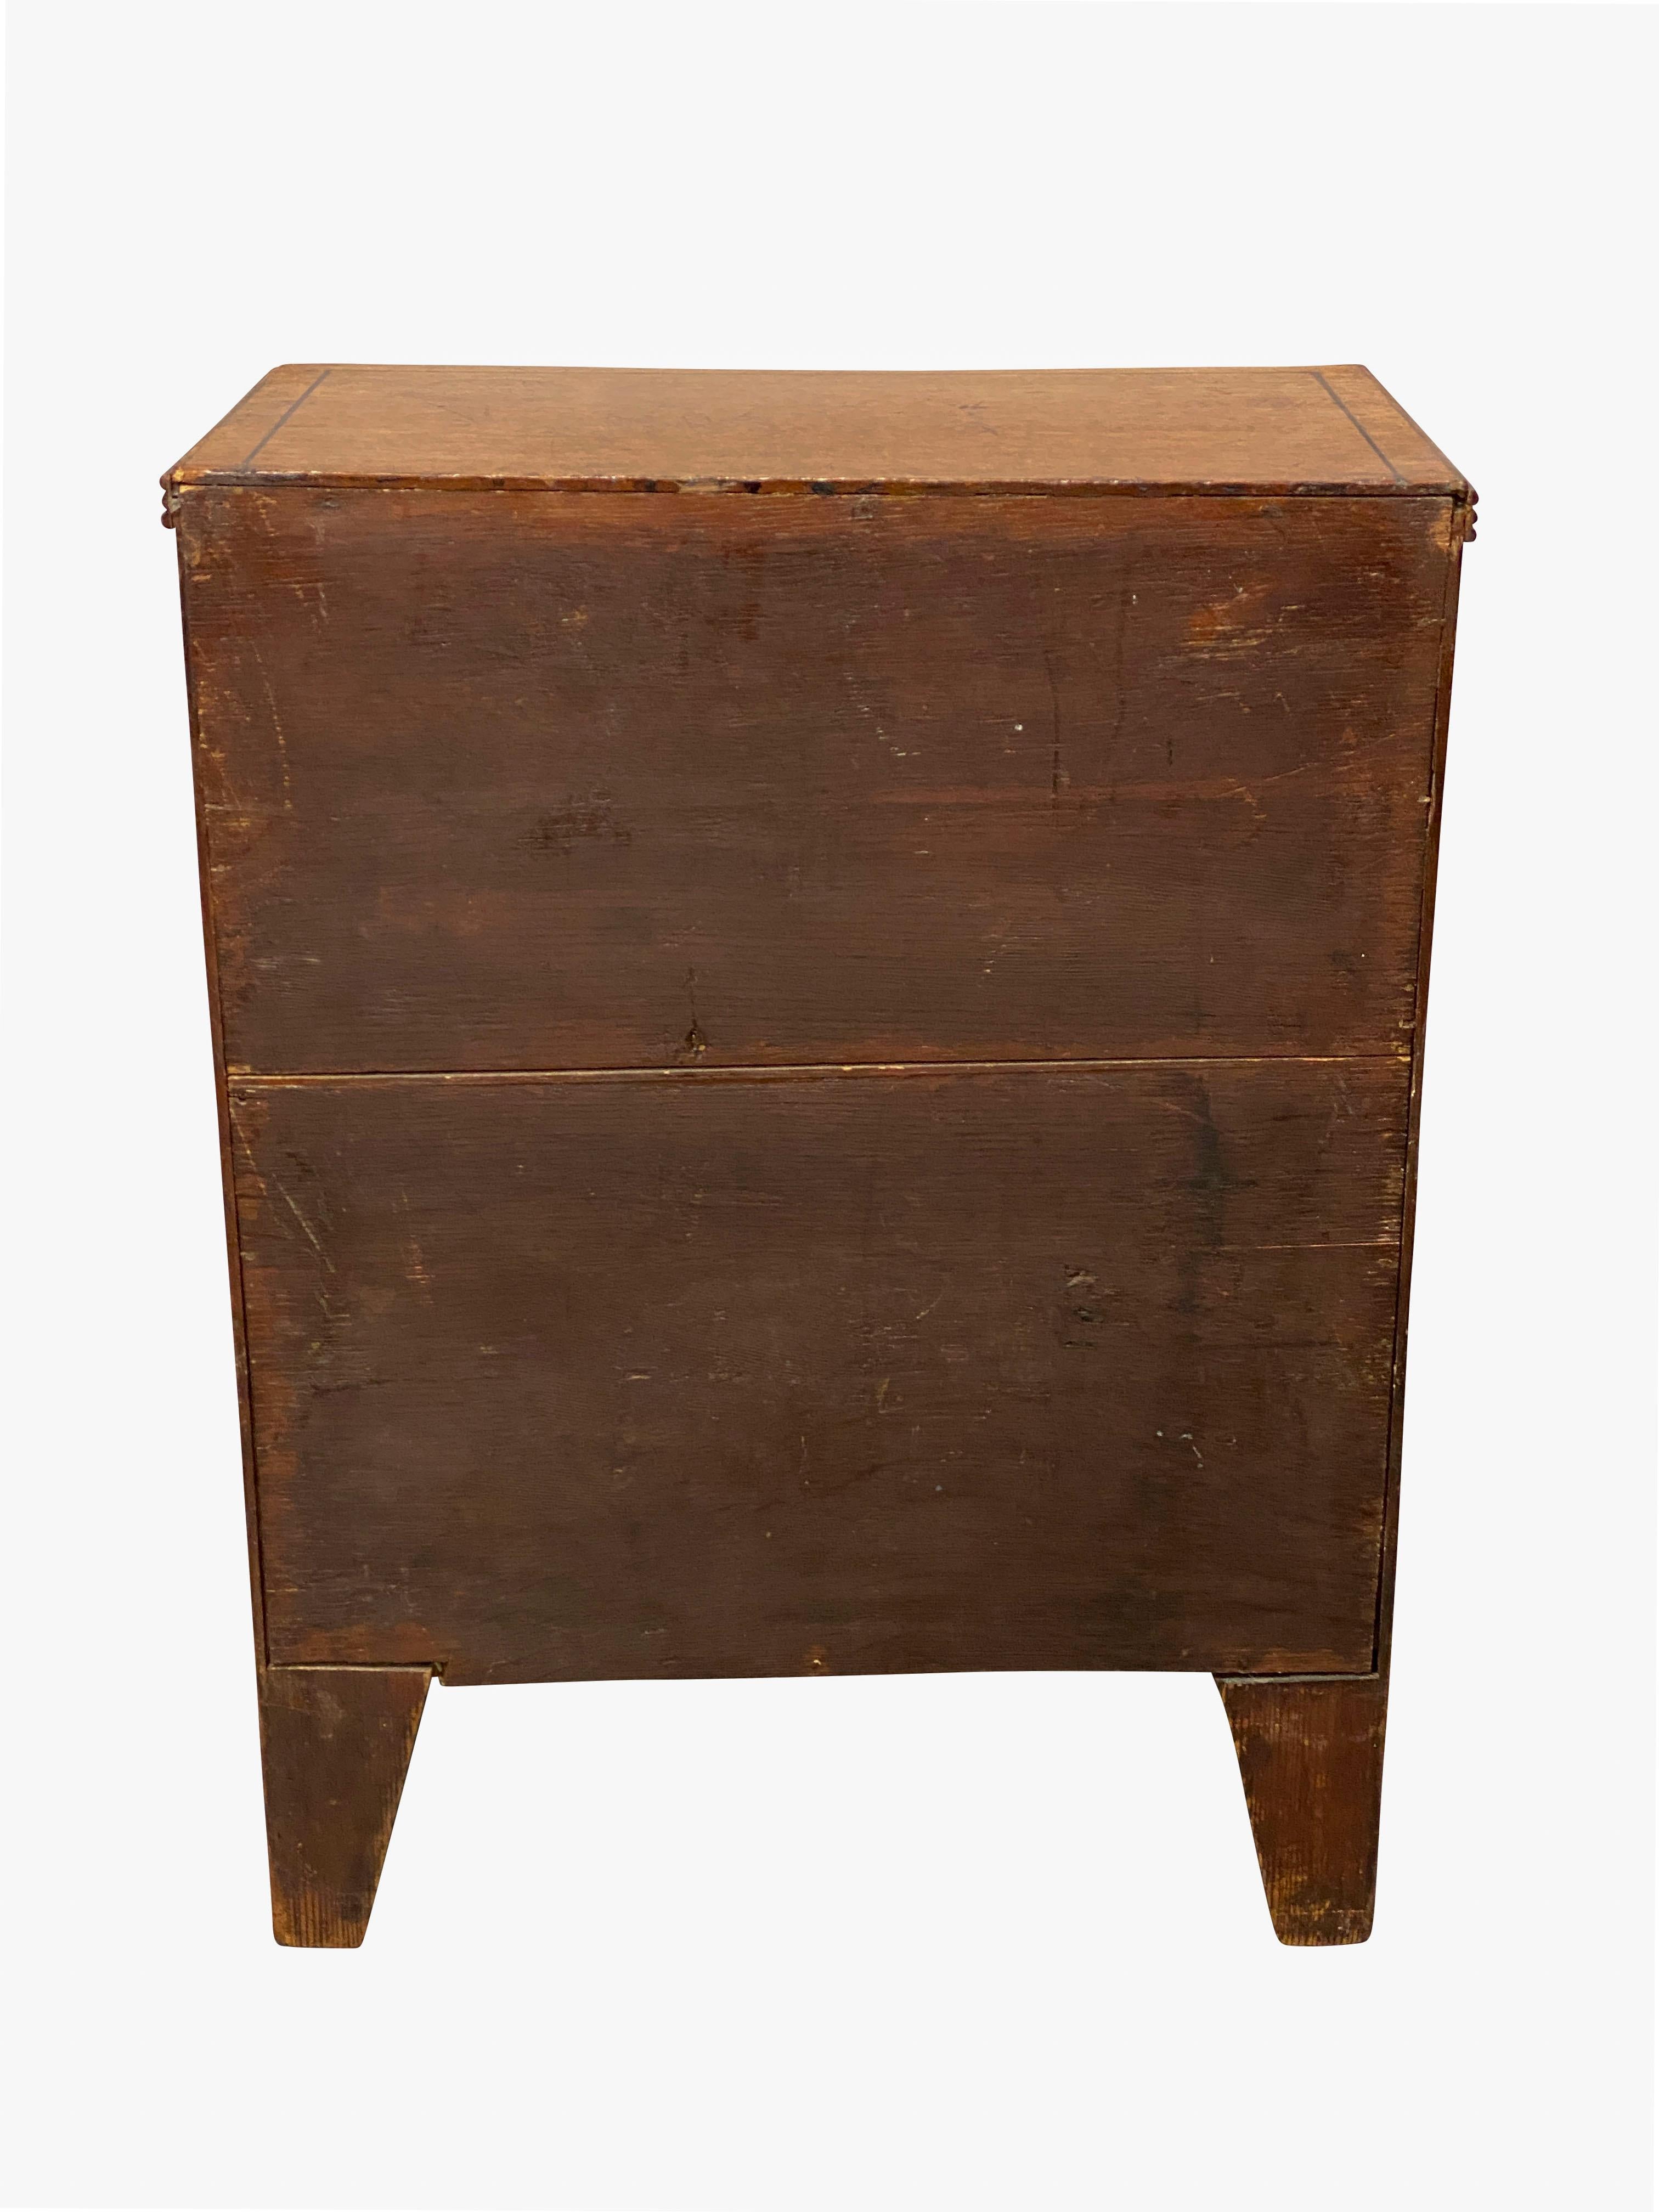 Salesman size with rectangular top over two over three drawers, splayed bracket feet.